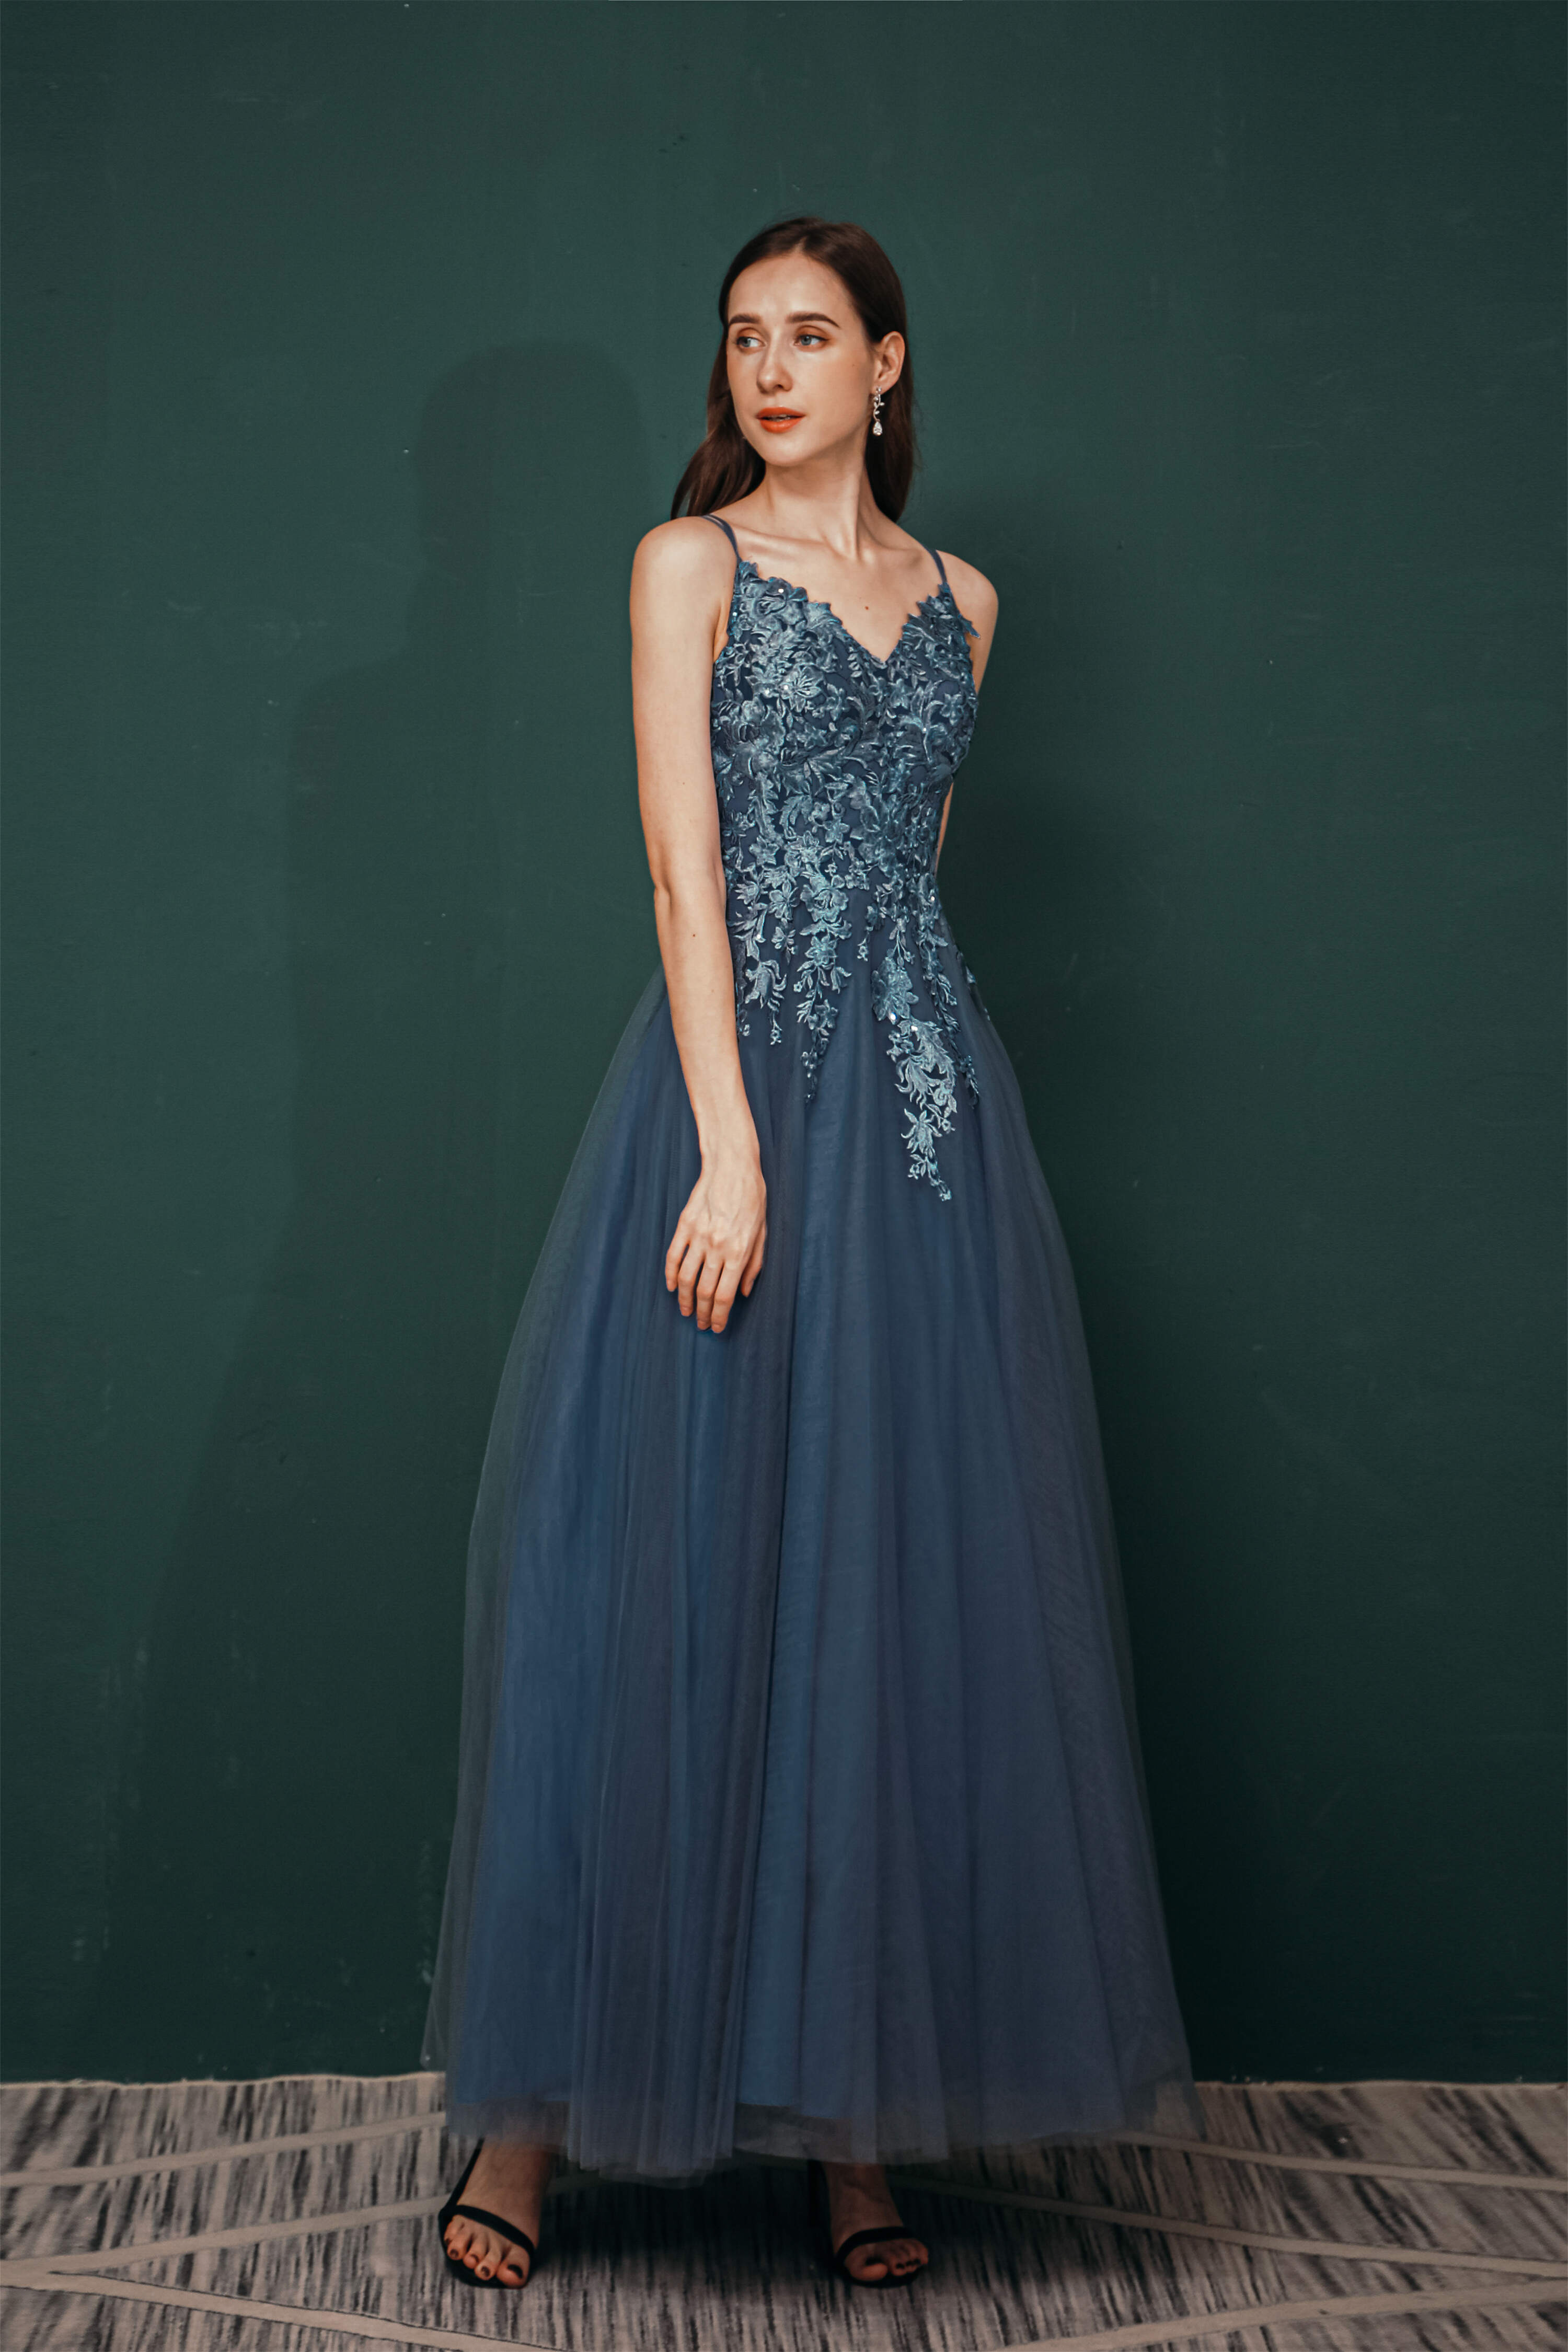 Dusty Blue Tulle A-line Low back Spaghetti strap Corset Prom Dresses outfit, Party Dress Dress Code